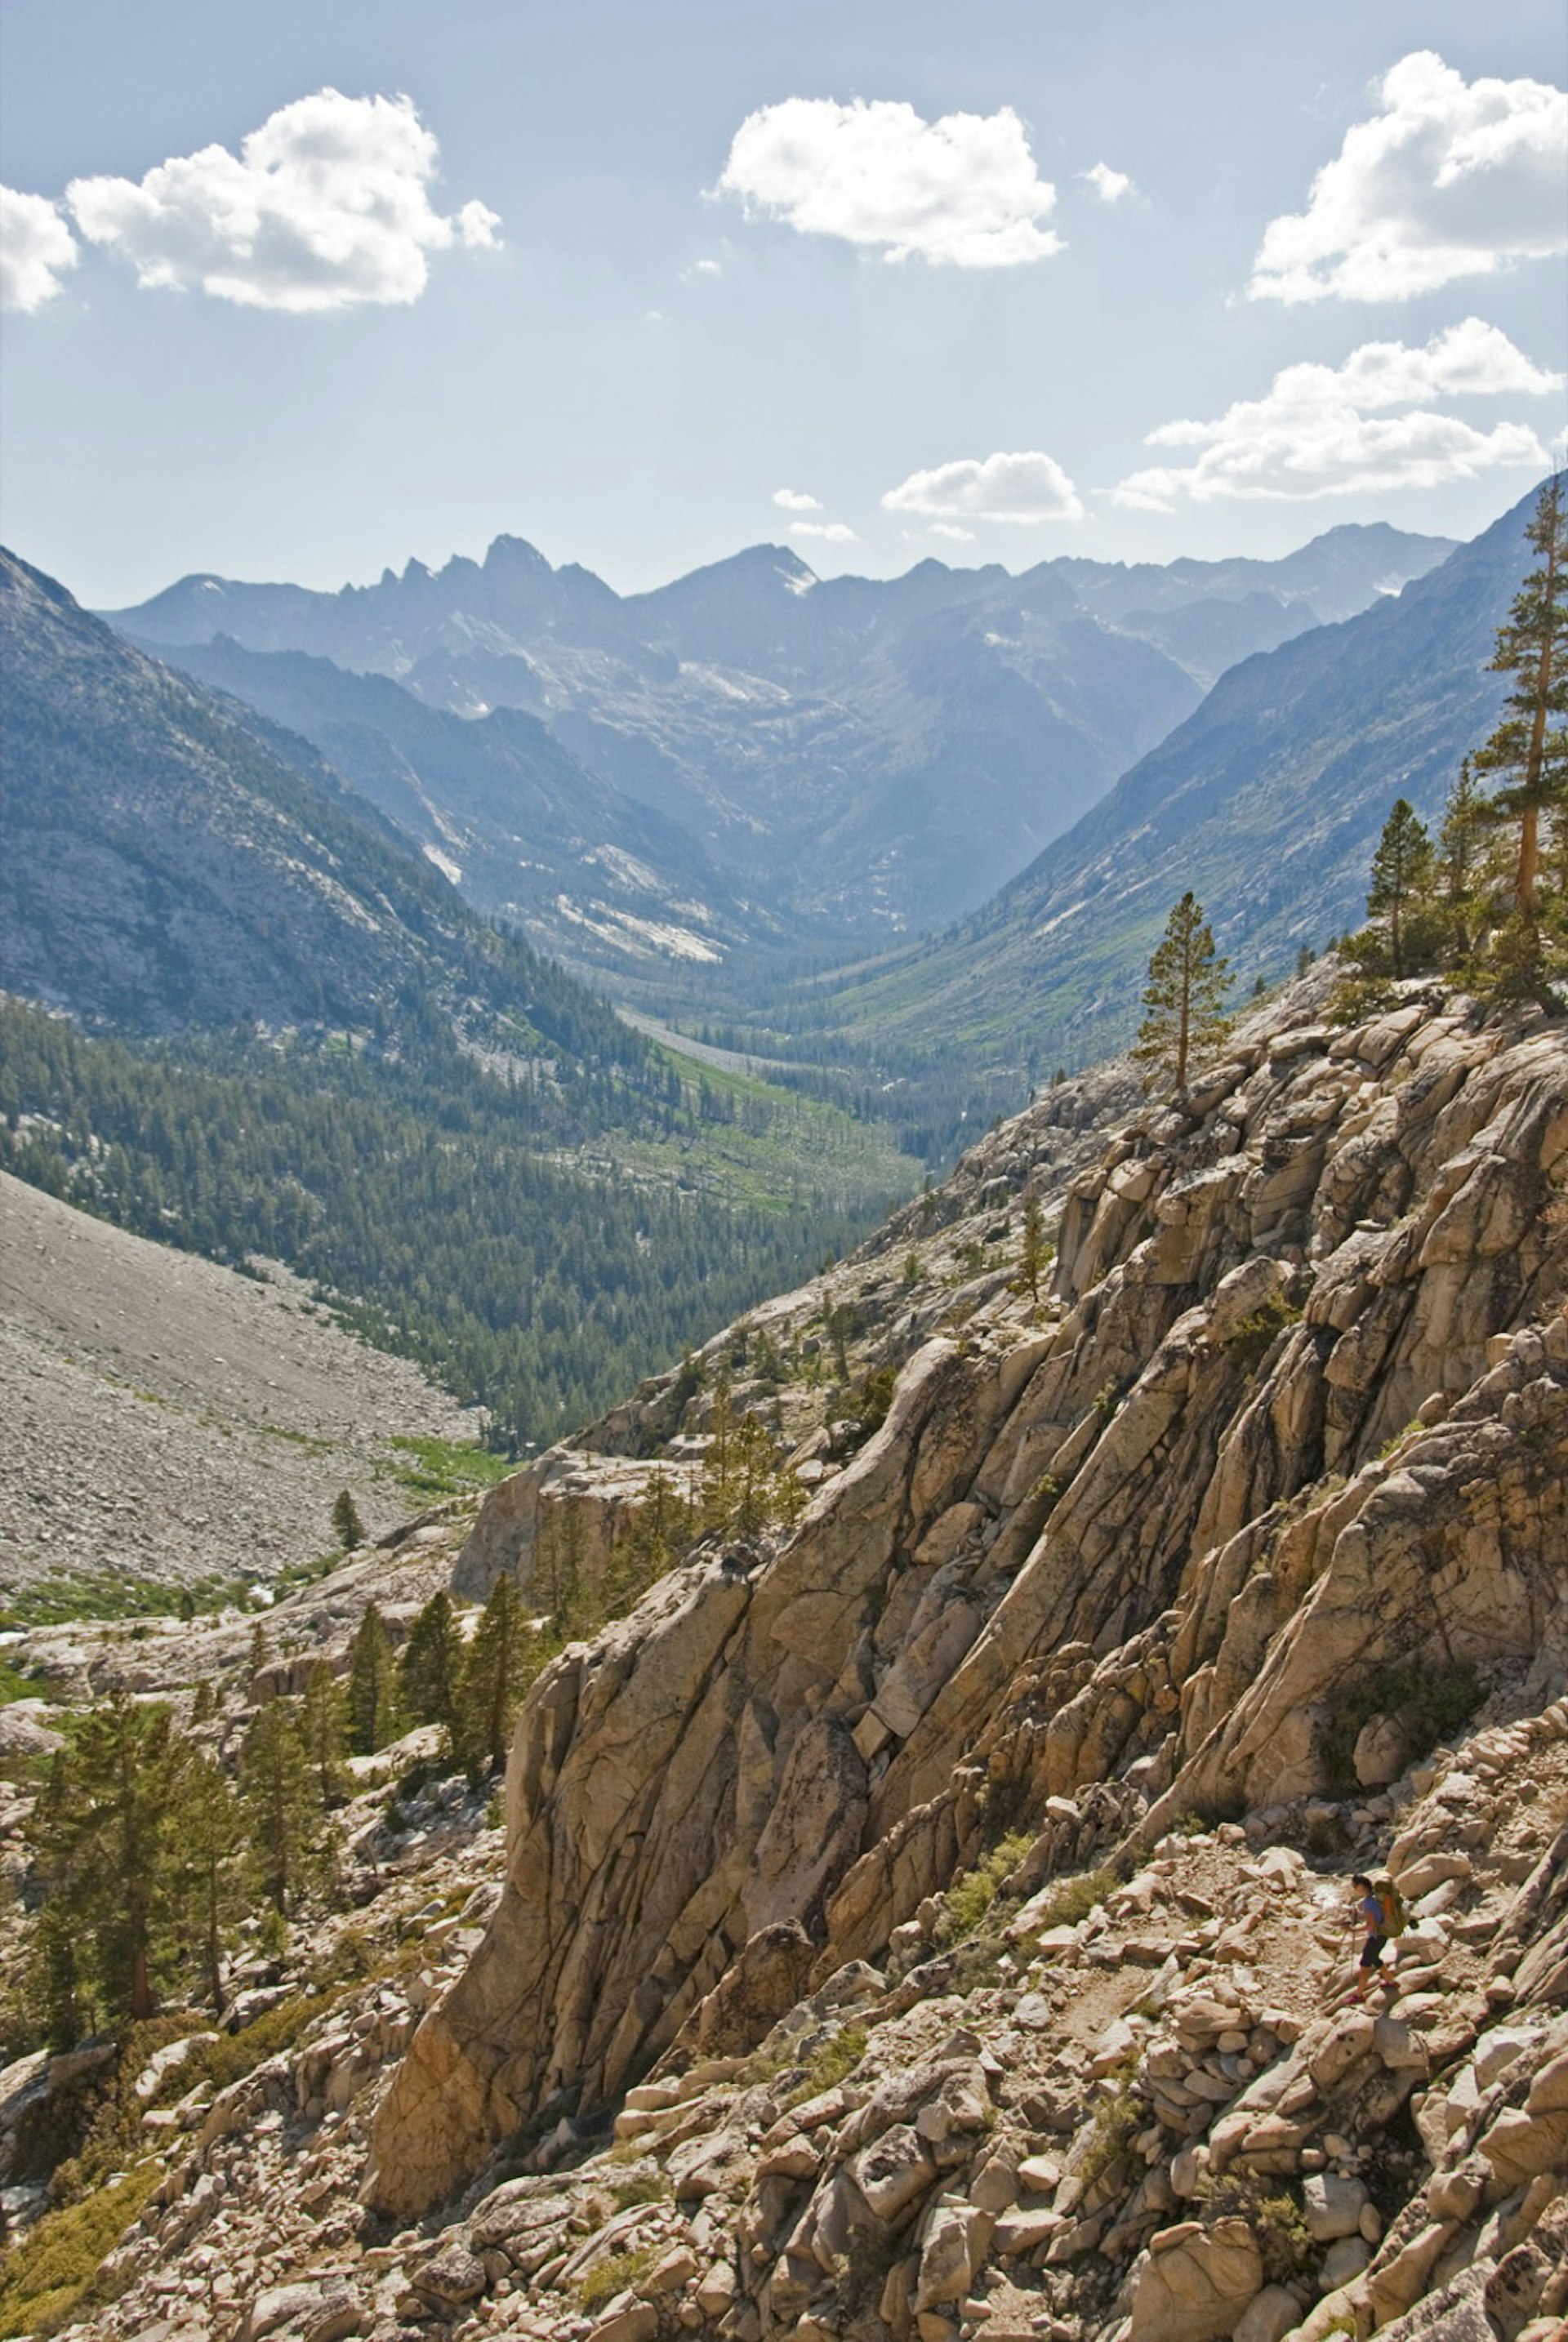 Rocky outcrops dominate the foreground as the peaks of the Sierra Nevada range extend far into the background on the Pacific Crest Trail © Sean Jansen / Lonely Planet